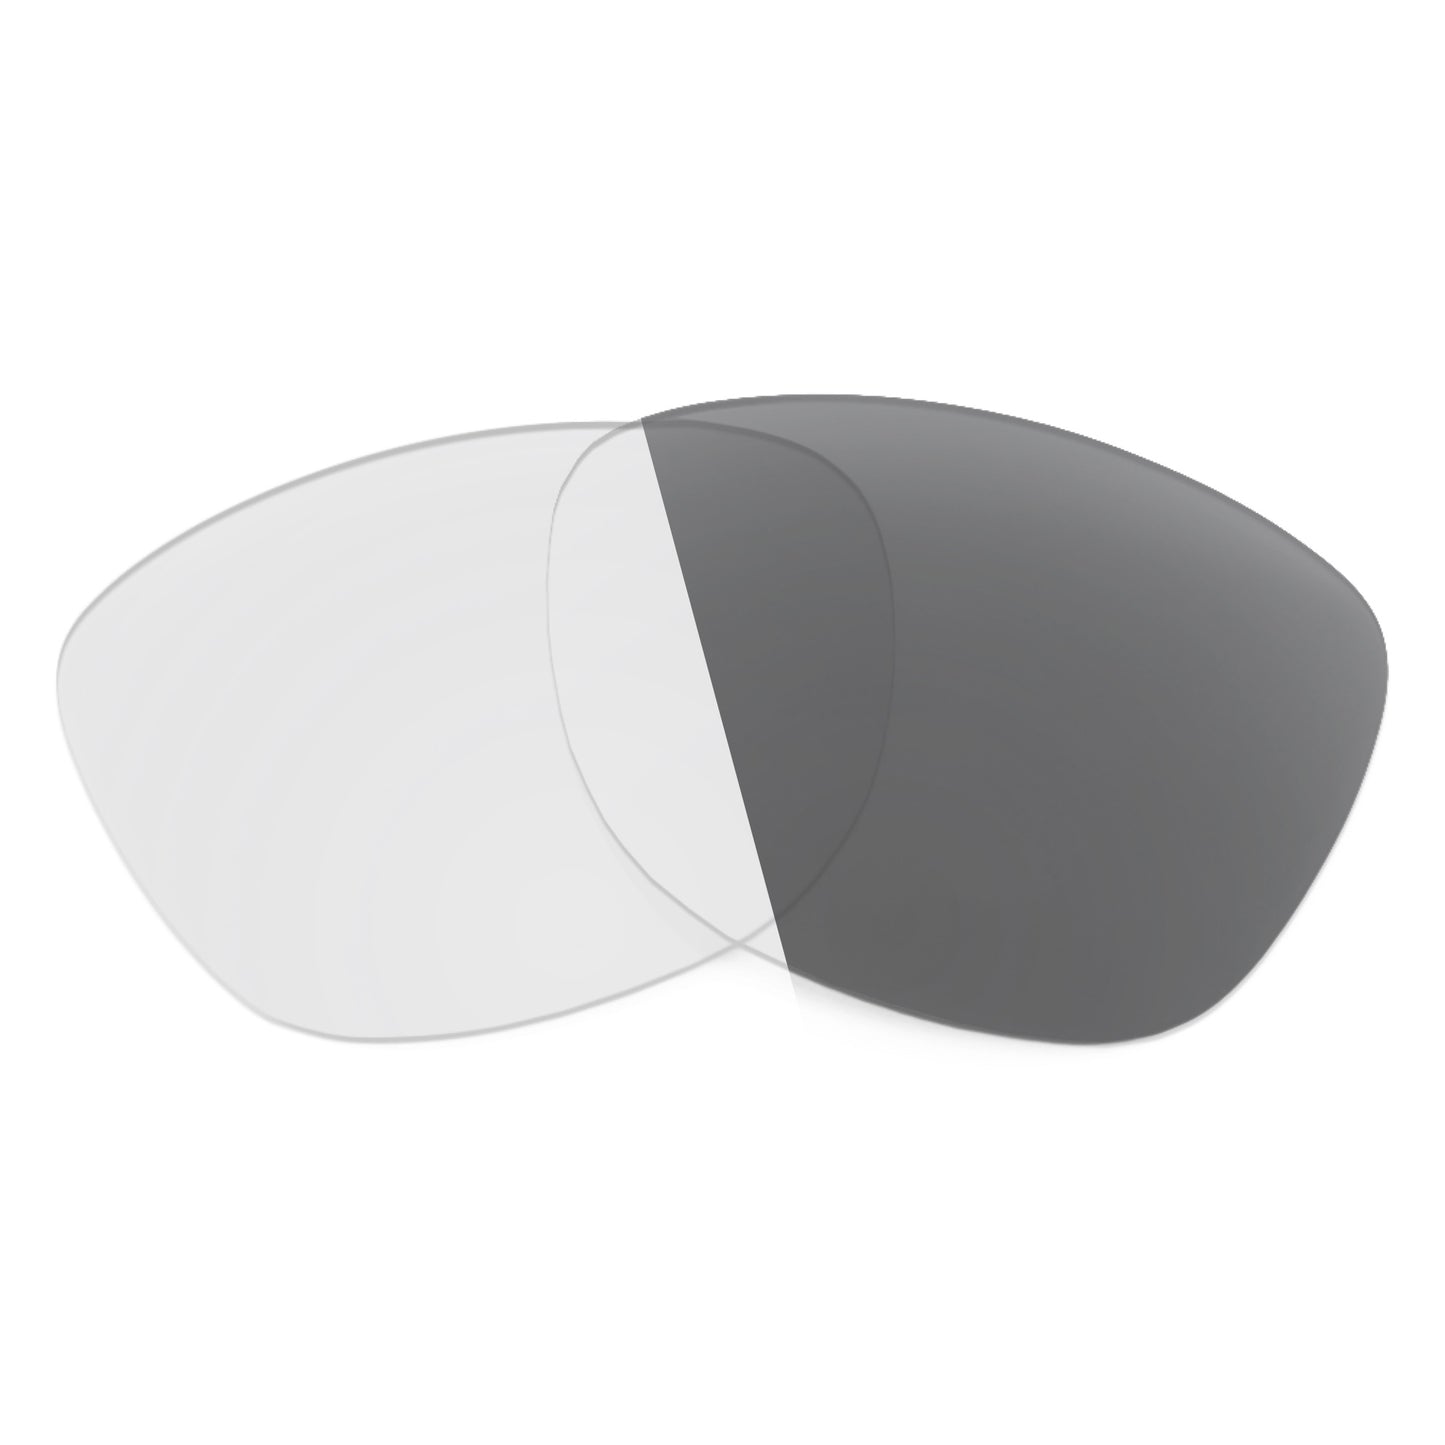 Revant replacement lenses for Ray-Ban Andy RB4202 55mm Non-Polarized Adapt Gray Photochromic